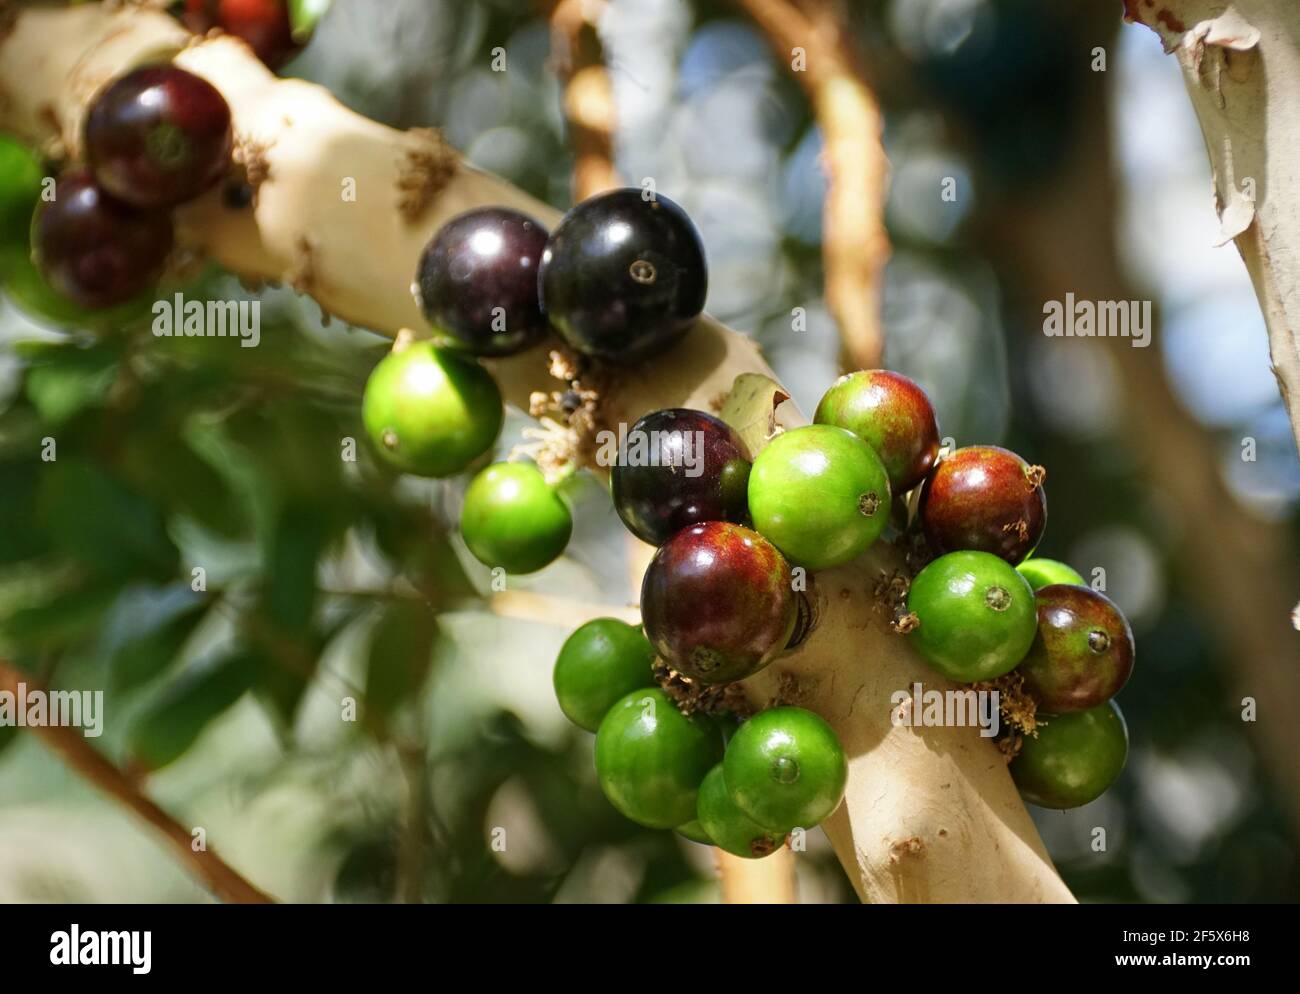 Clusters of Jaboticaba edible fruits, with scientific name Plinia Cauliflora, originated from Brazil and Bolivia Stock Photo